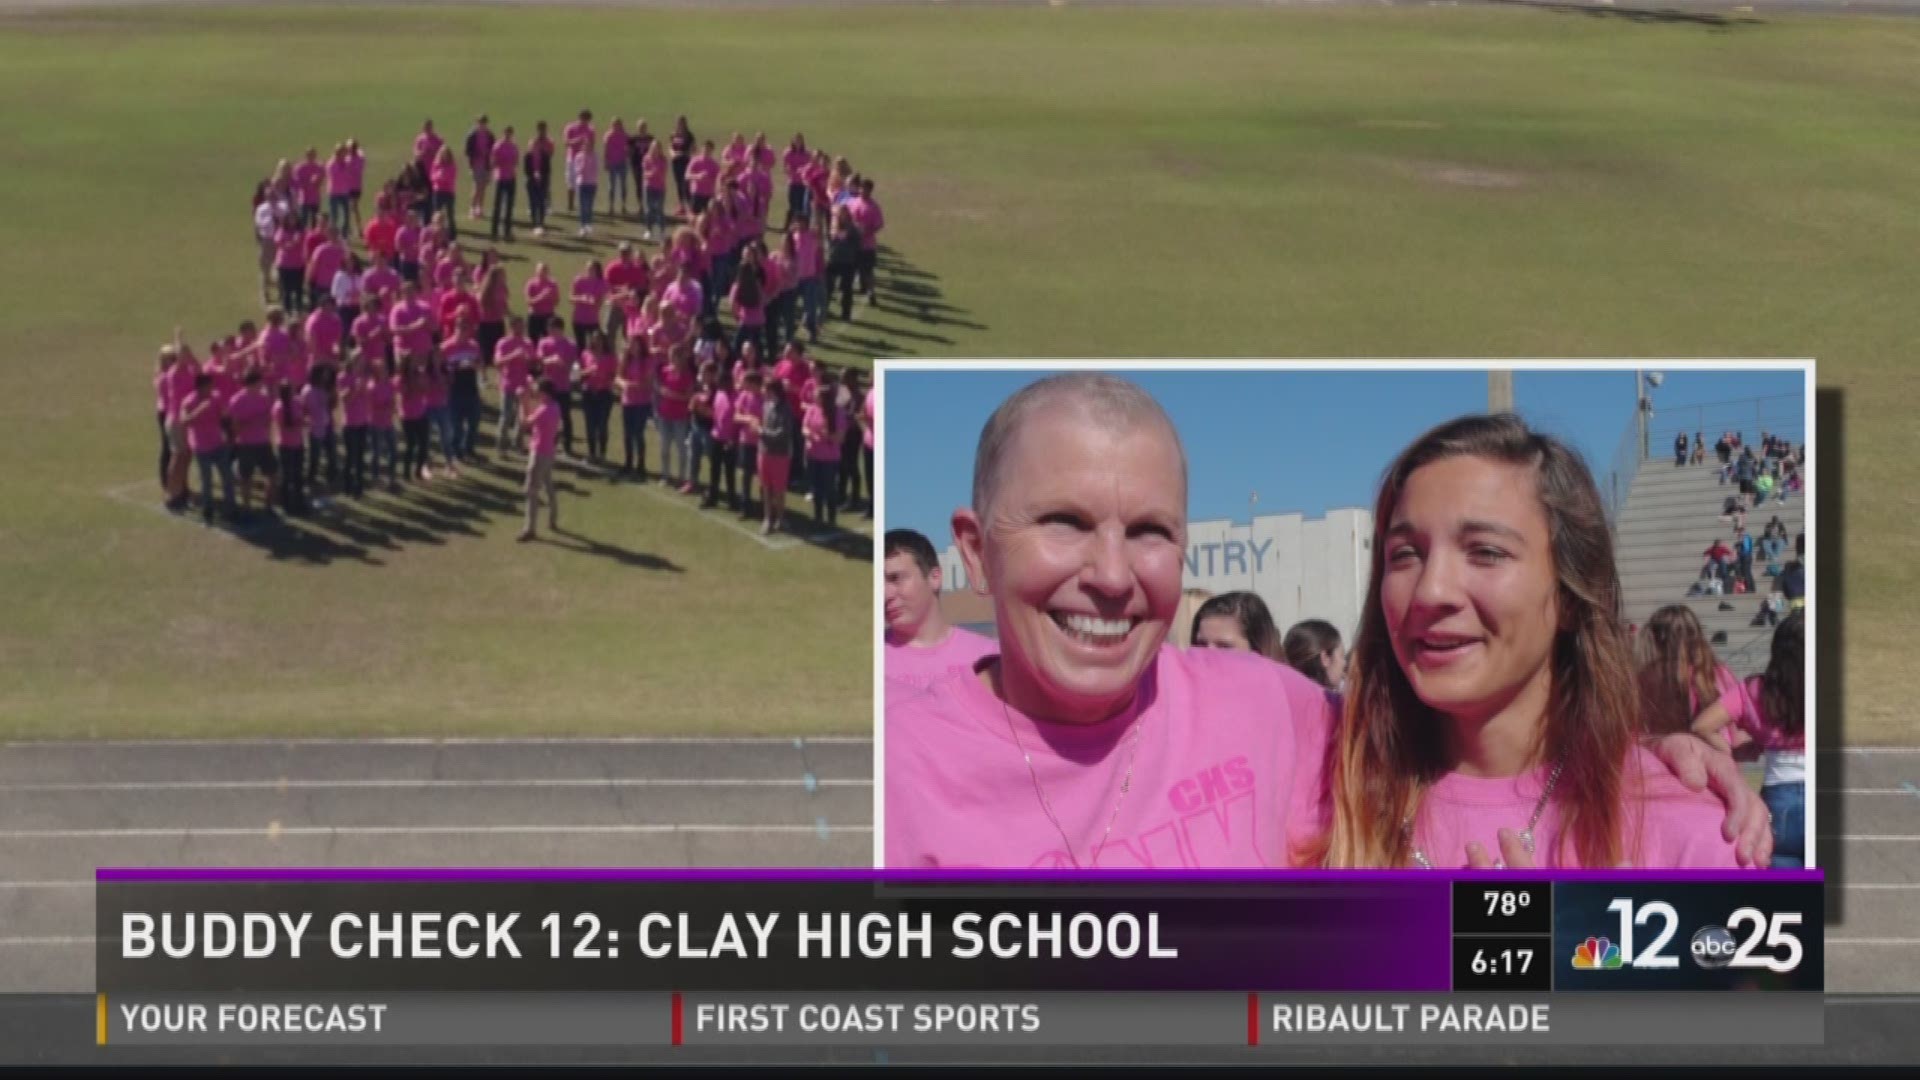 Ms. McCool found her own breast cancer through a self-exam and is now on her way to beating it. Her students at Clay High are such a support!